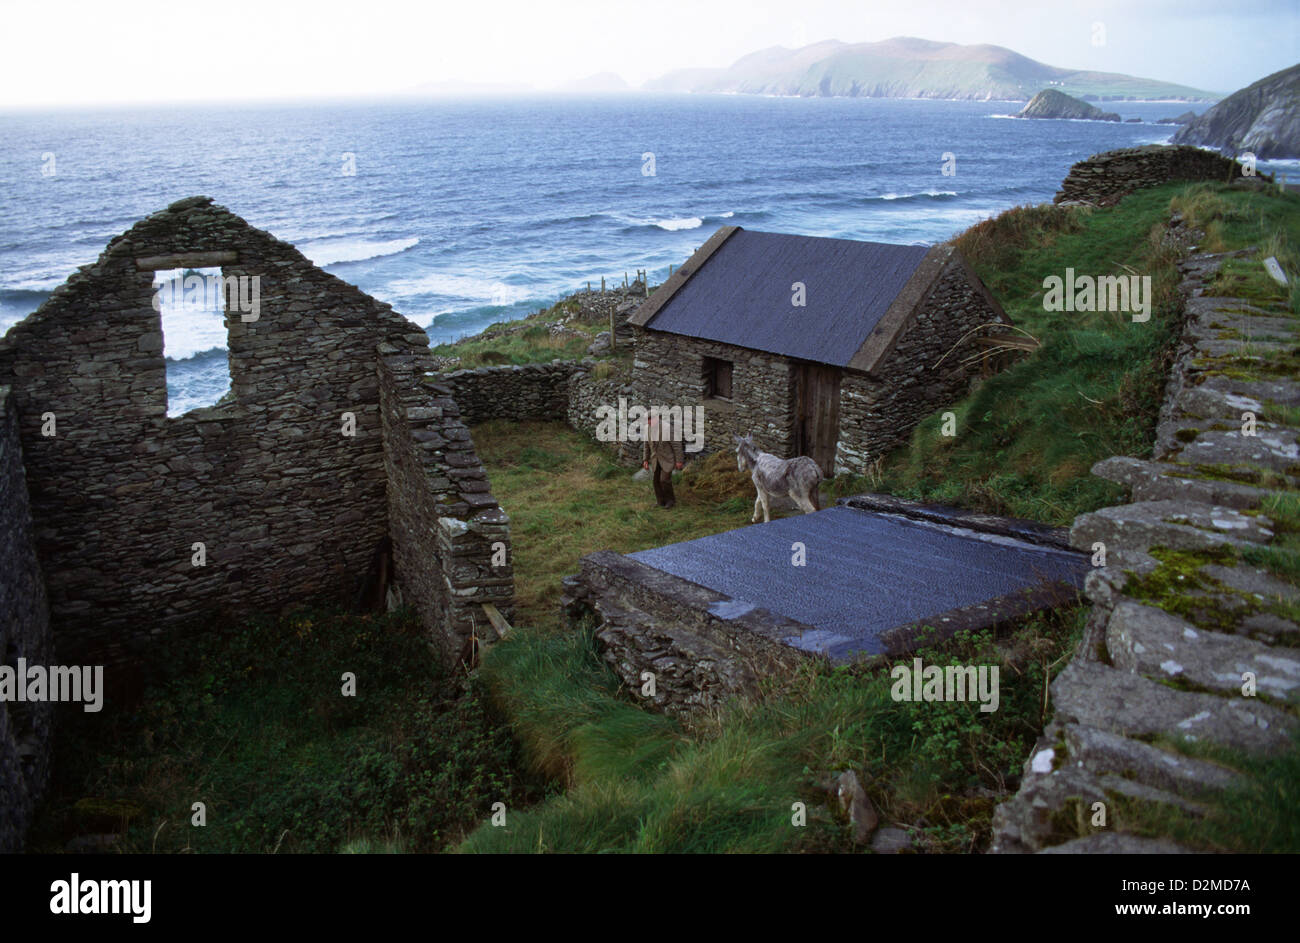 A farmer on his land at Dunquin on the Dingle Peninsula, County Kerry, Ireland. Stock Photo